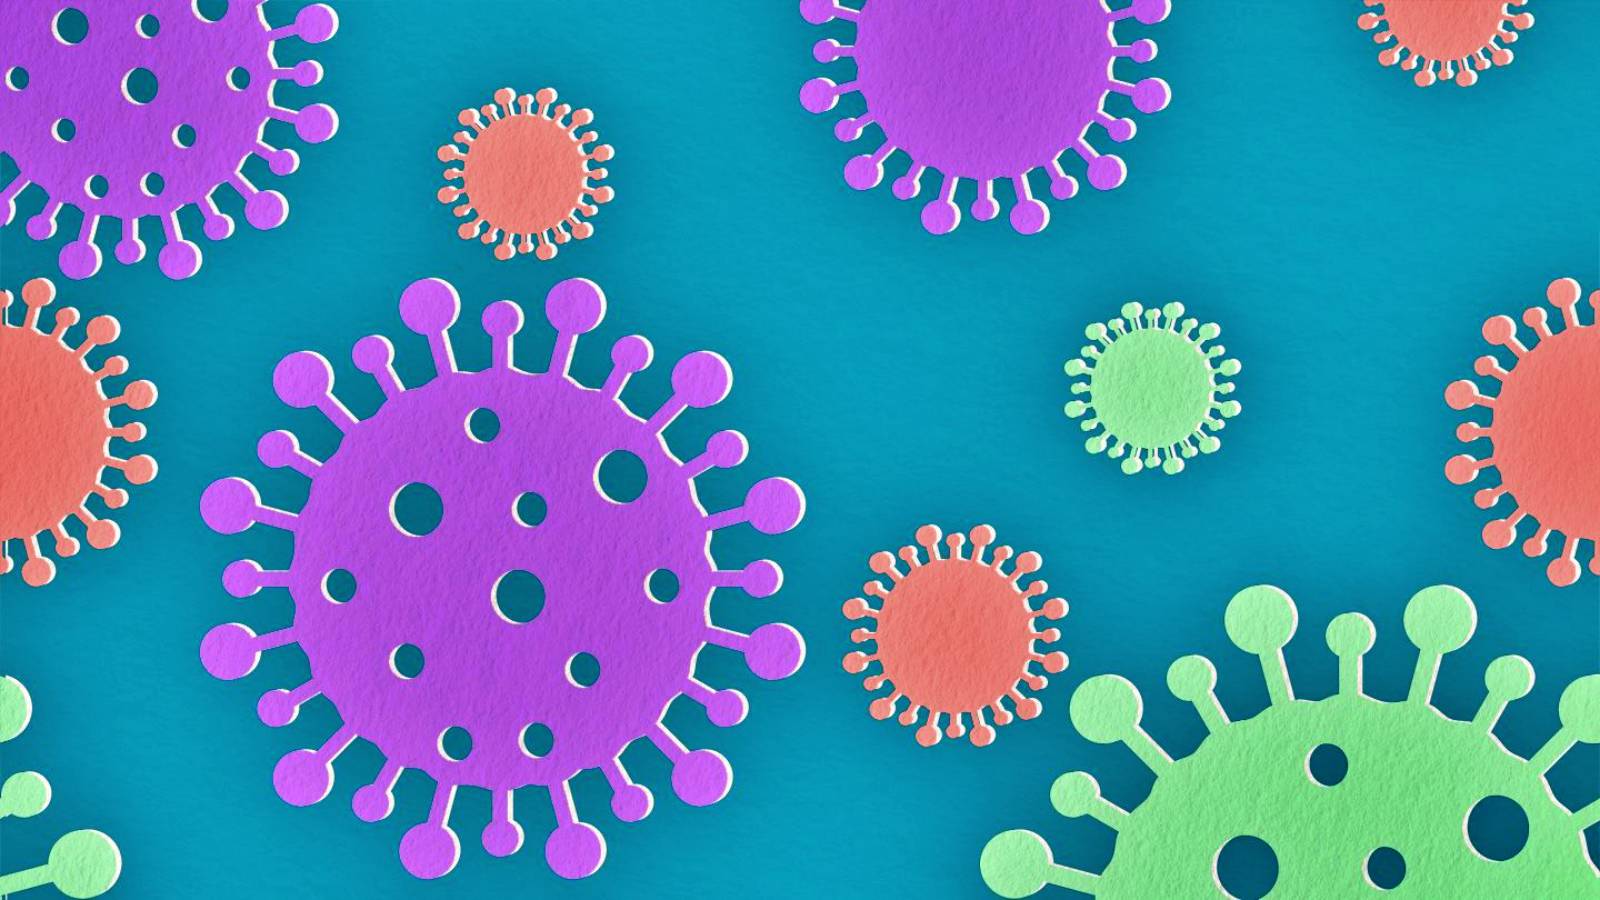 Coronavirus Romania Huge Number of Infections Officially Announced October 23, 2021